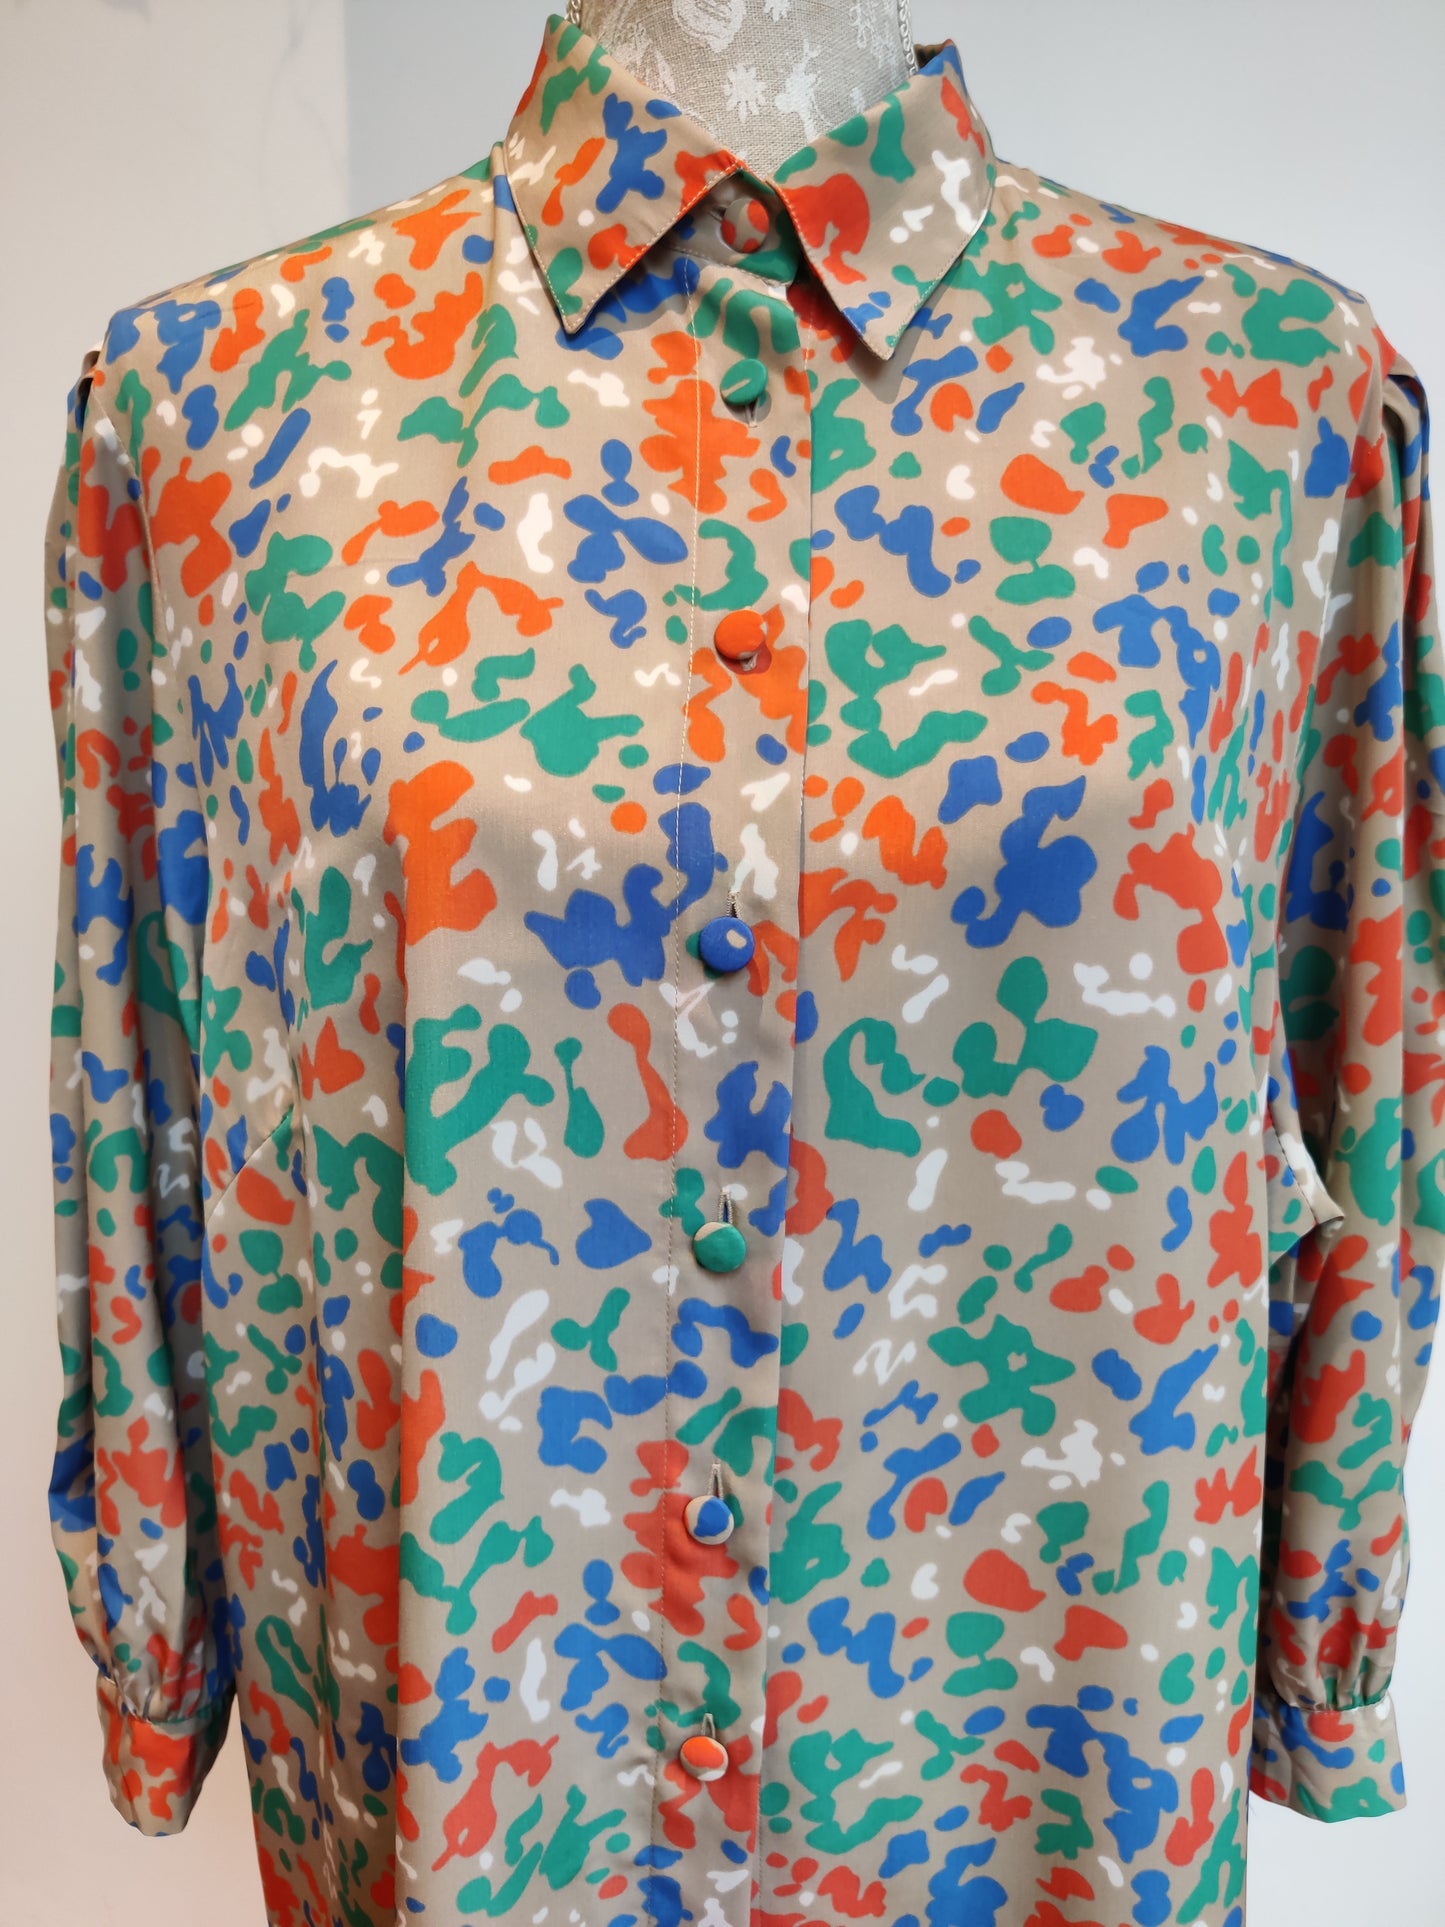 80s multicoloured vintage blouse with 3/4 sleeves. Size 20 - 22.